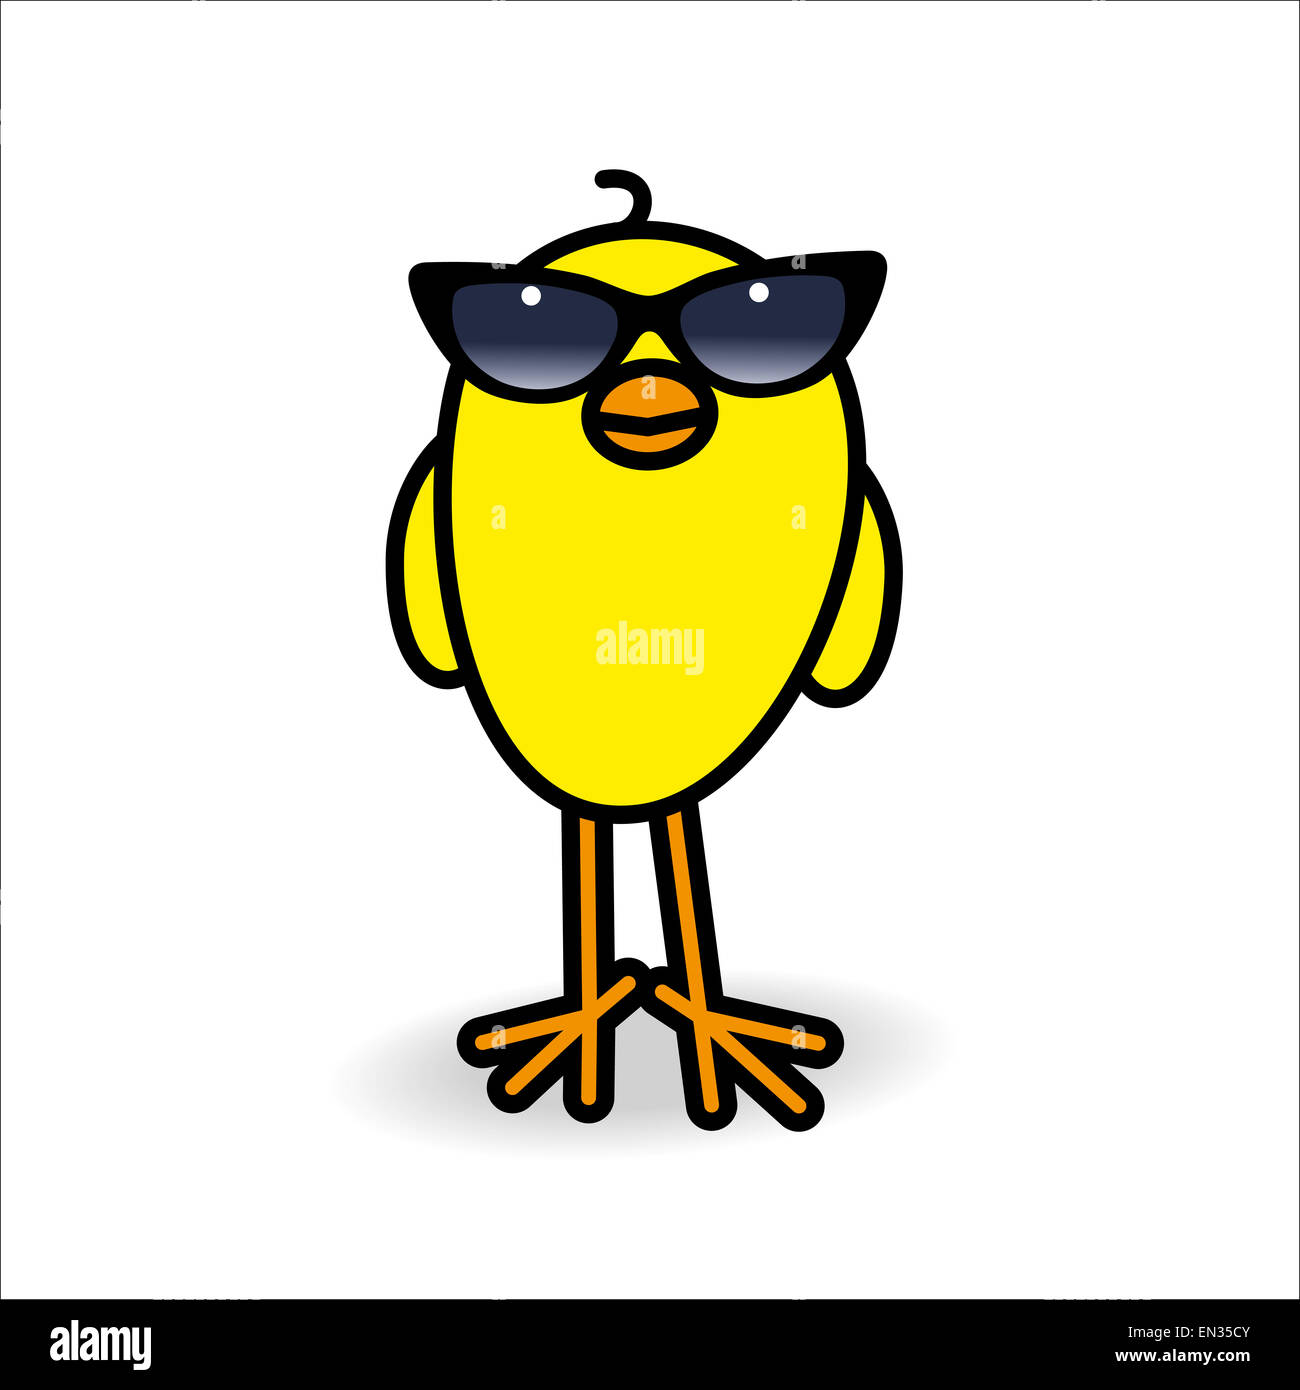 Single Smiling Yellow Chick Wearing Ladies Black Rimmed SUnglasses Staring towards camera on White Background Stock Photo